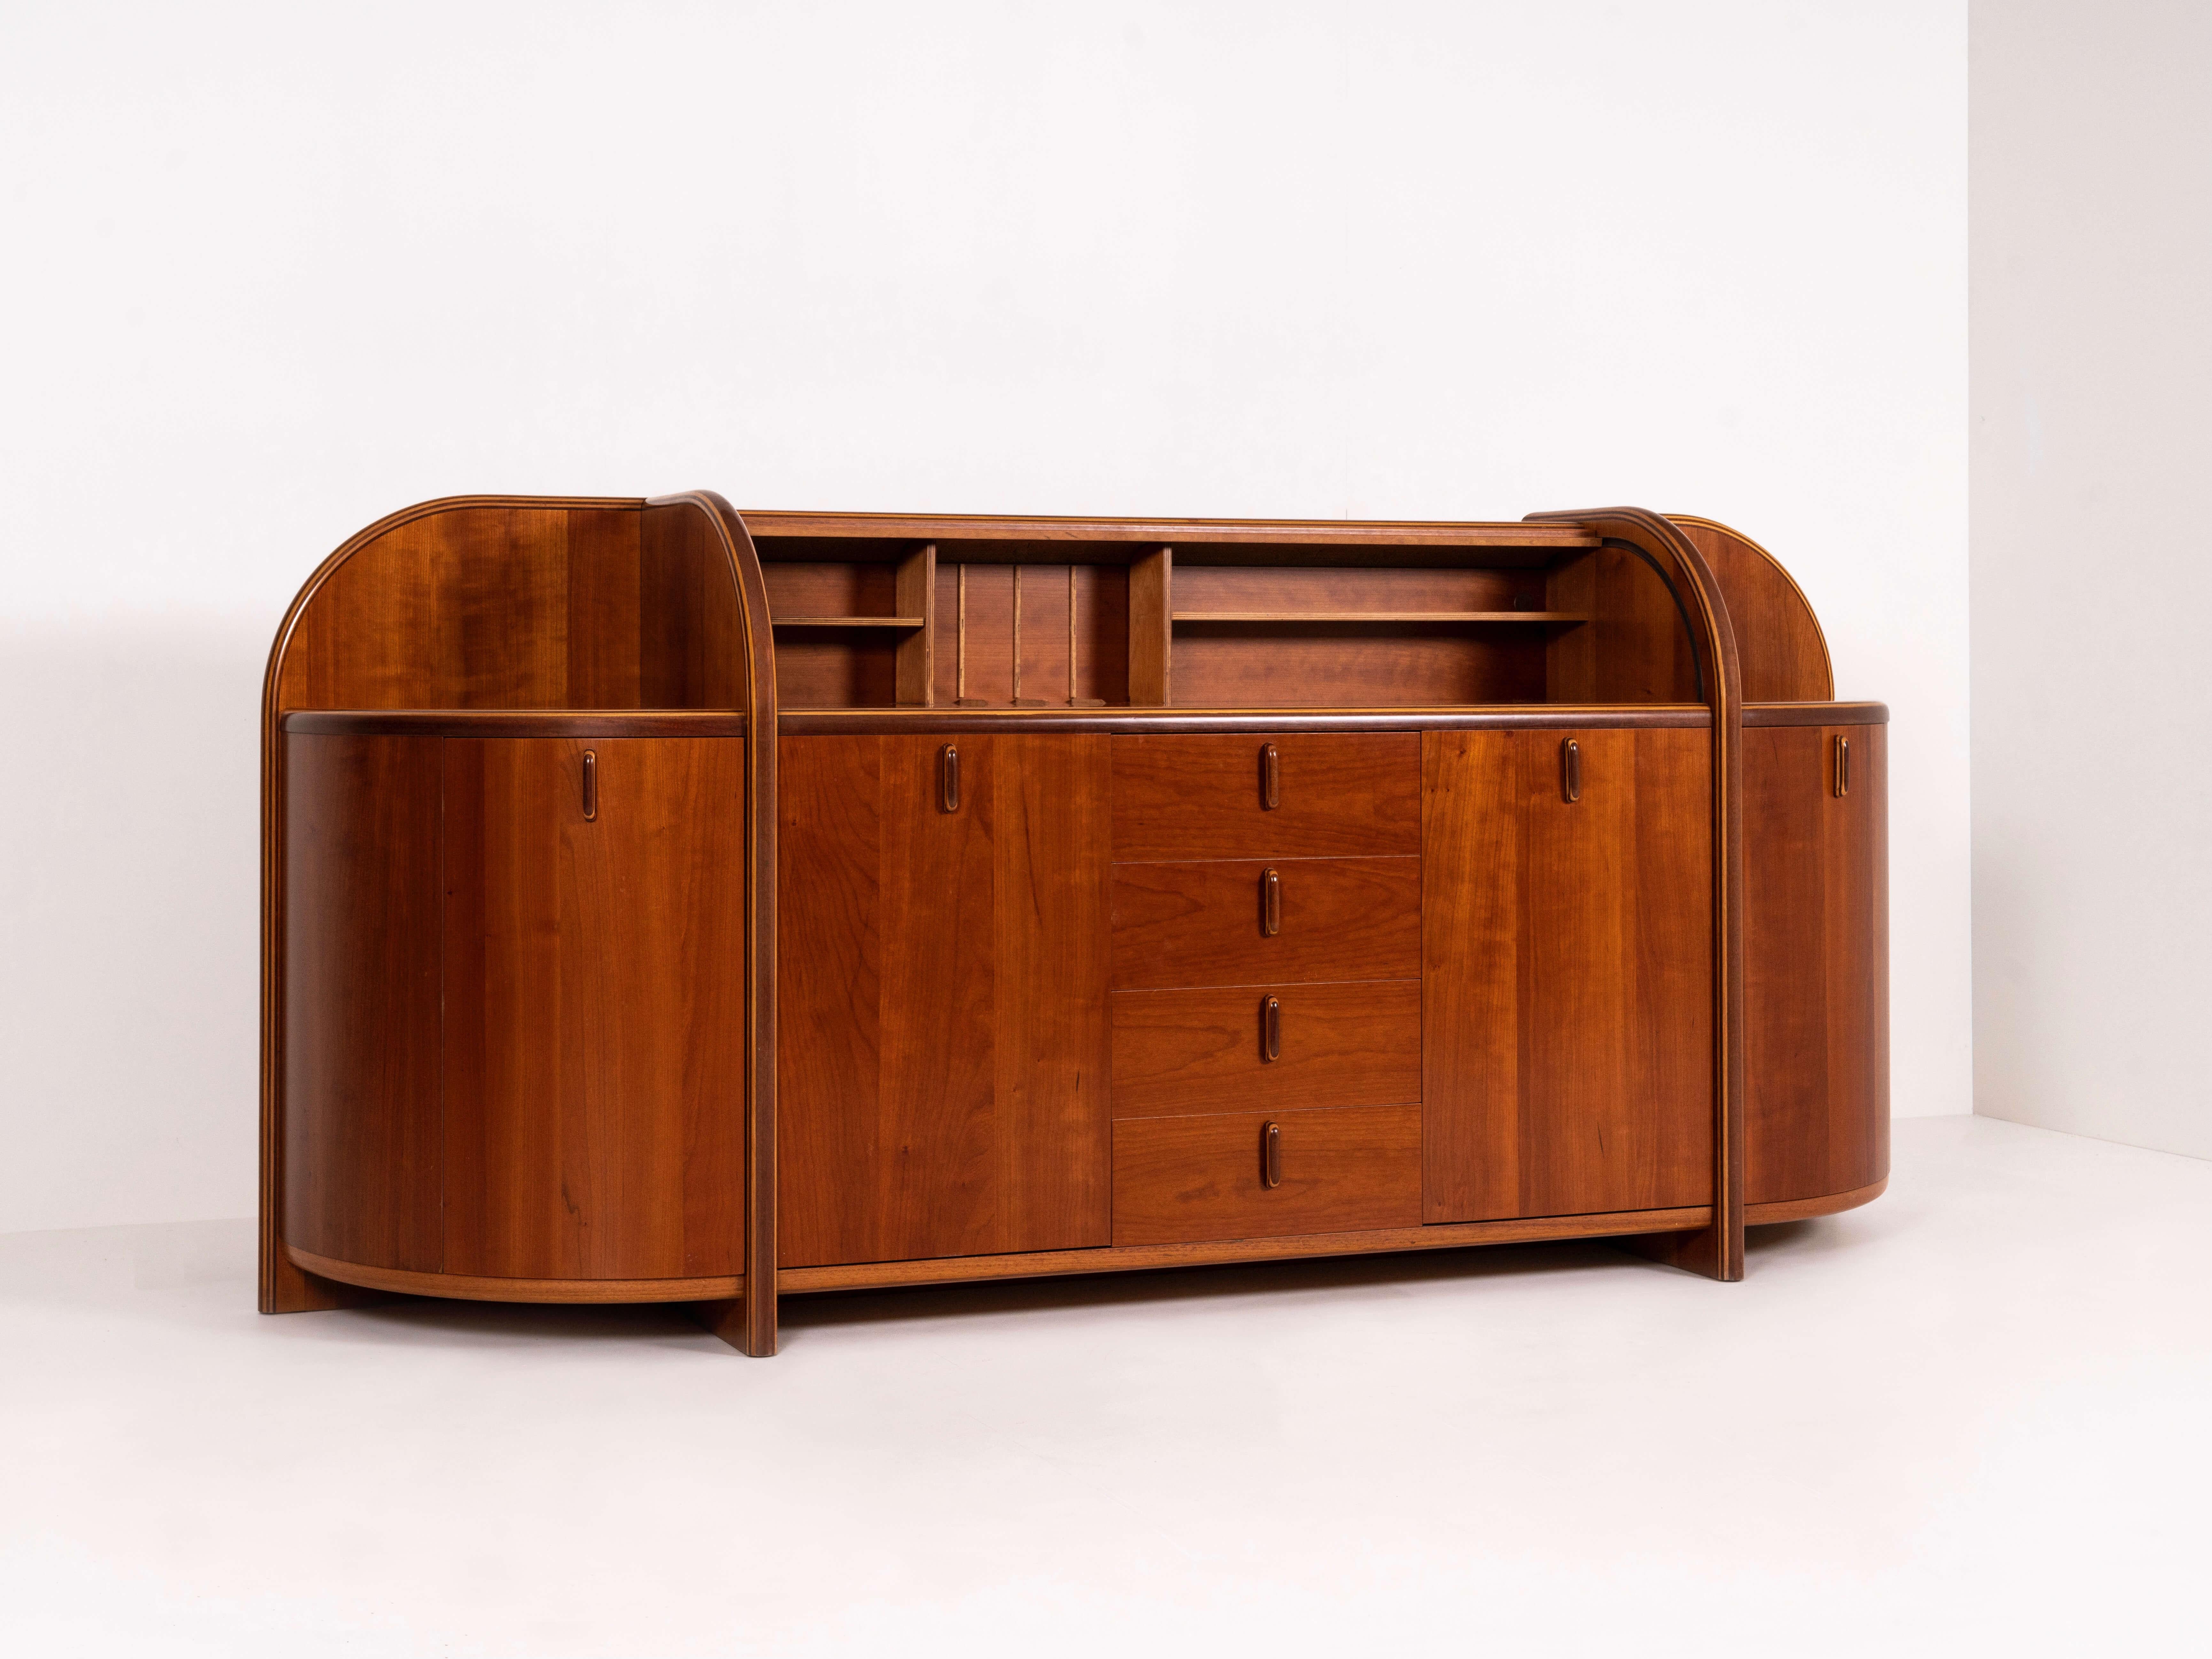 Impressive and Unique Credenza by Giovanni Offredi for Tosi from the 'Antologia Series' from Italy, 1970s. This credenza has an Art Deco style, however is from a later period. The design has round shapes on the edges and beautifully detailed